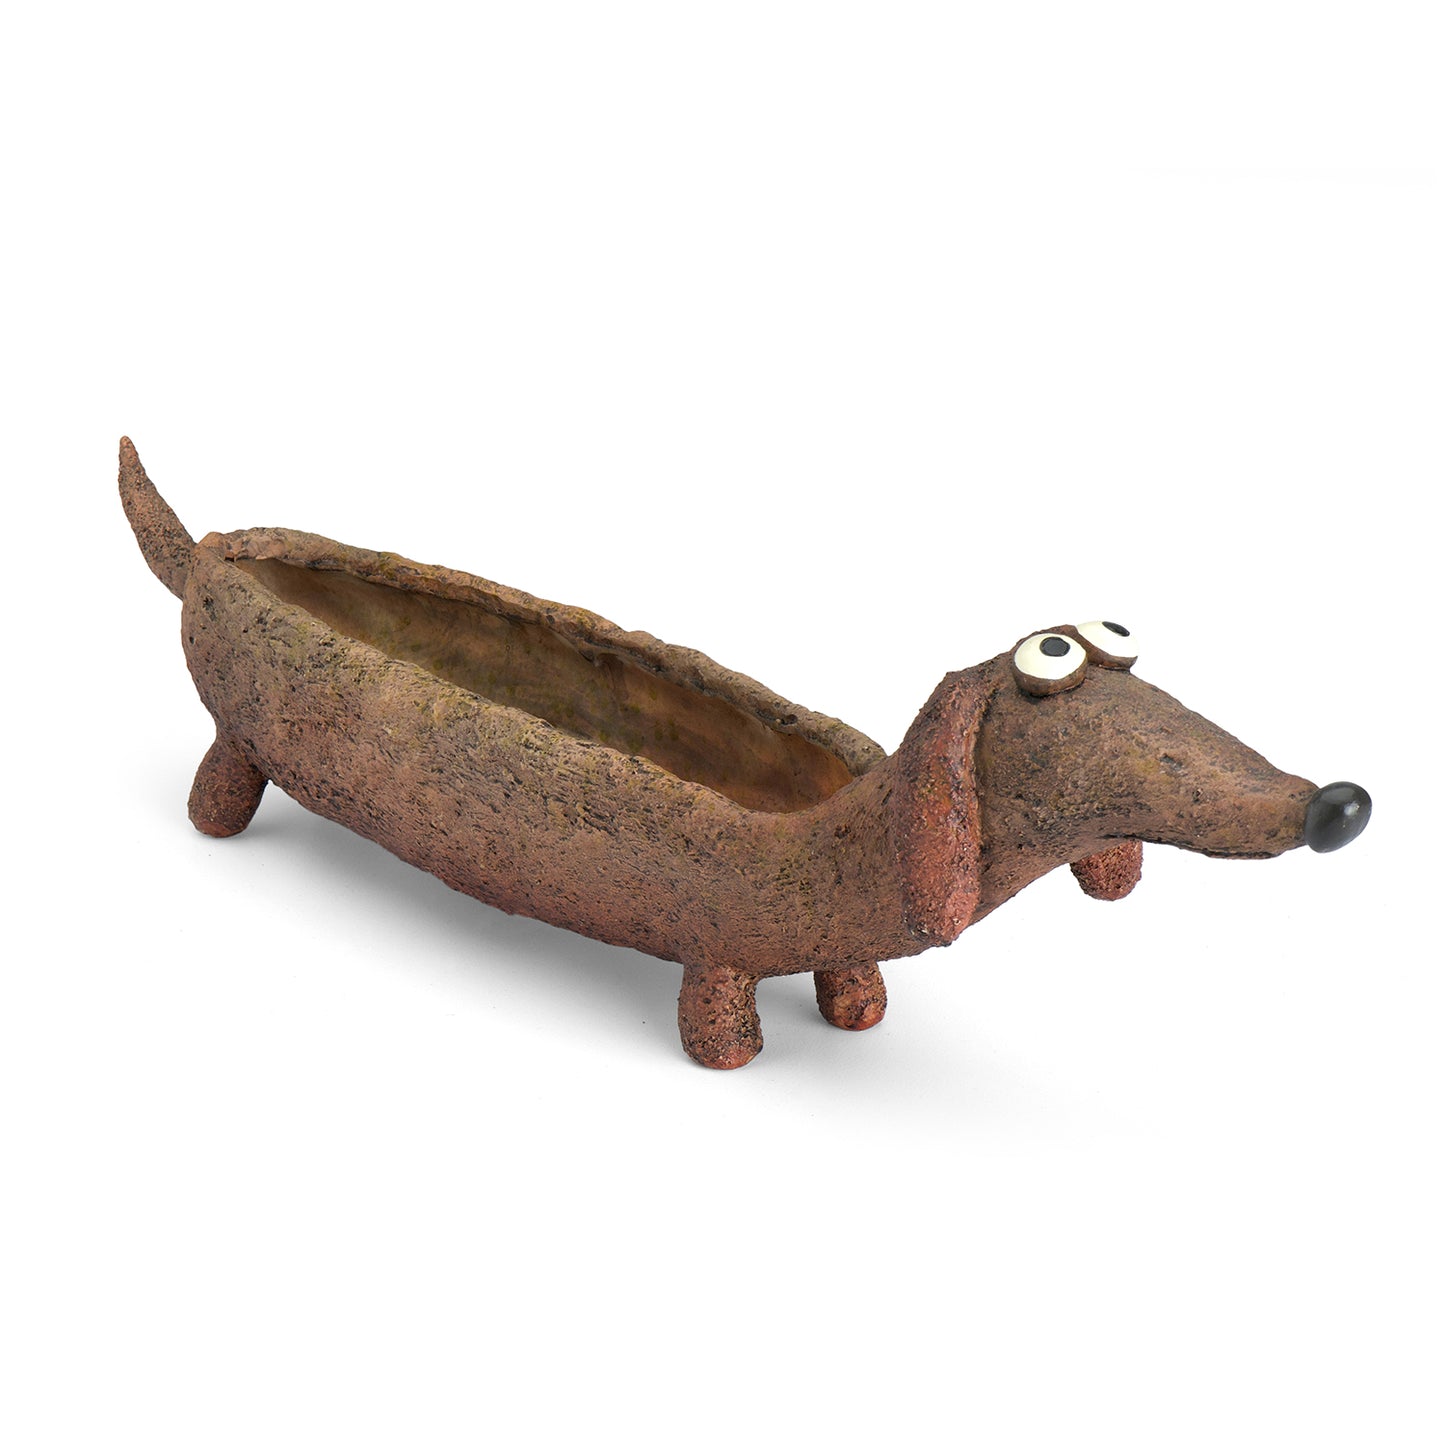 Rufus Doxin the Dog Planter